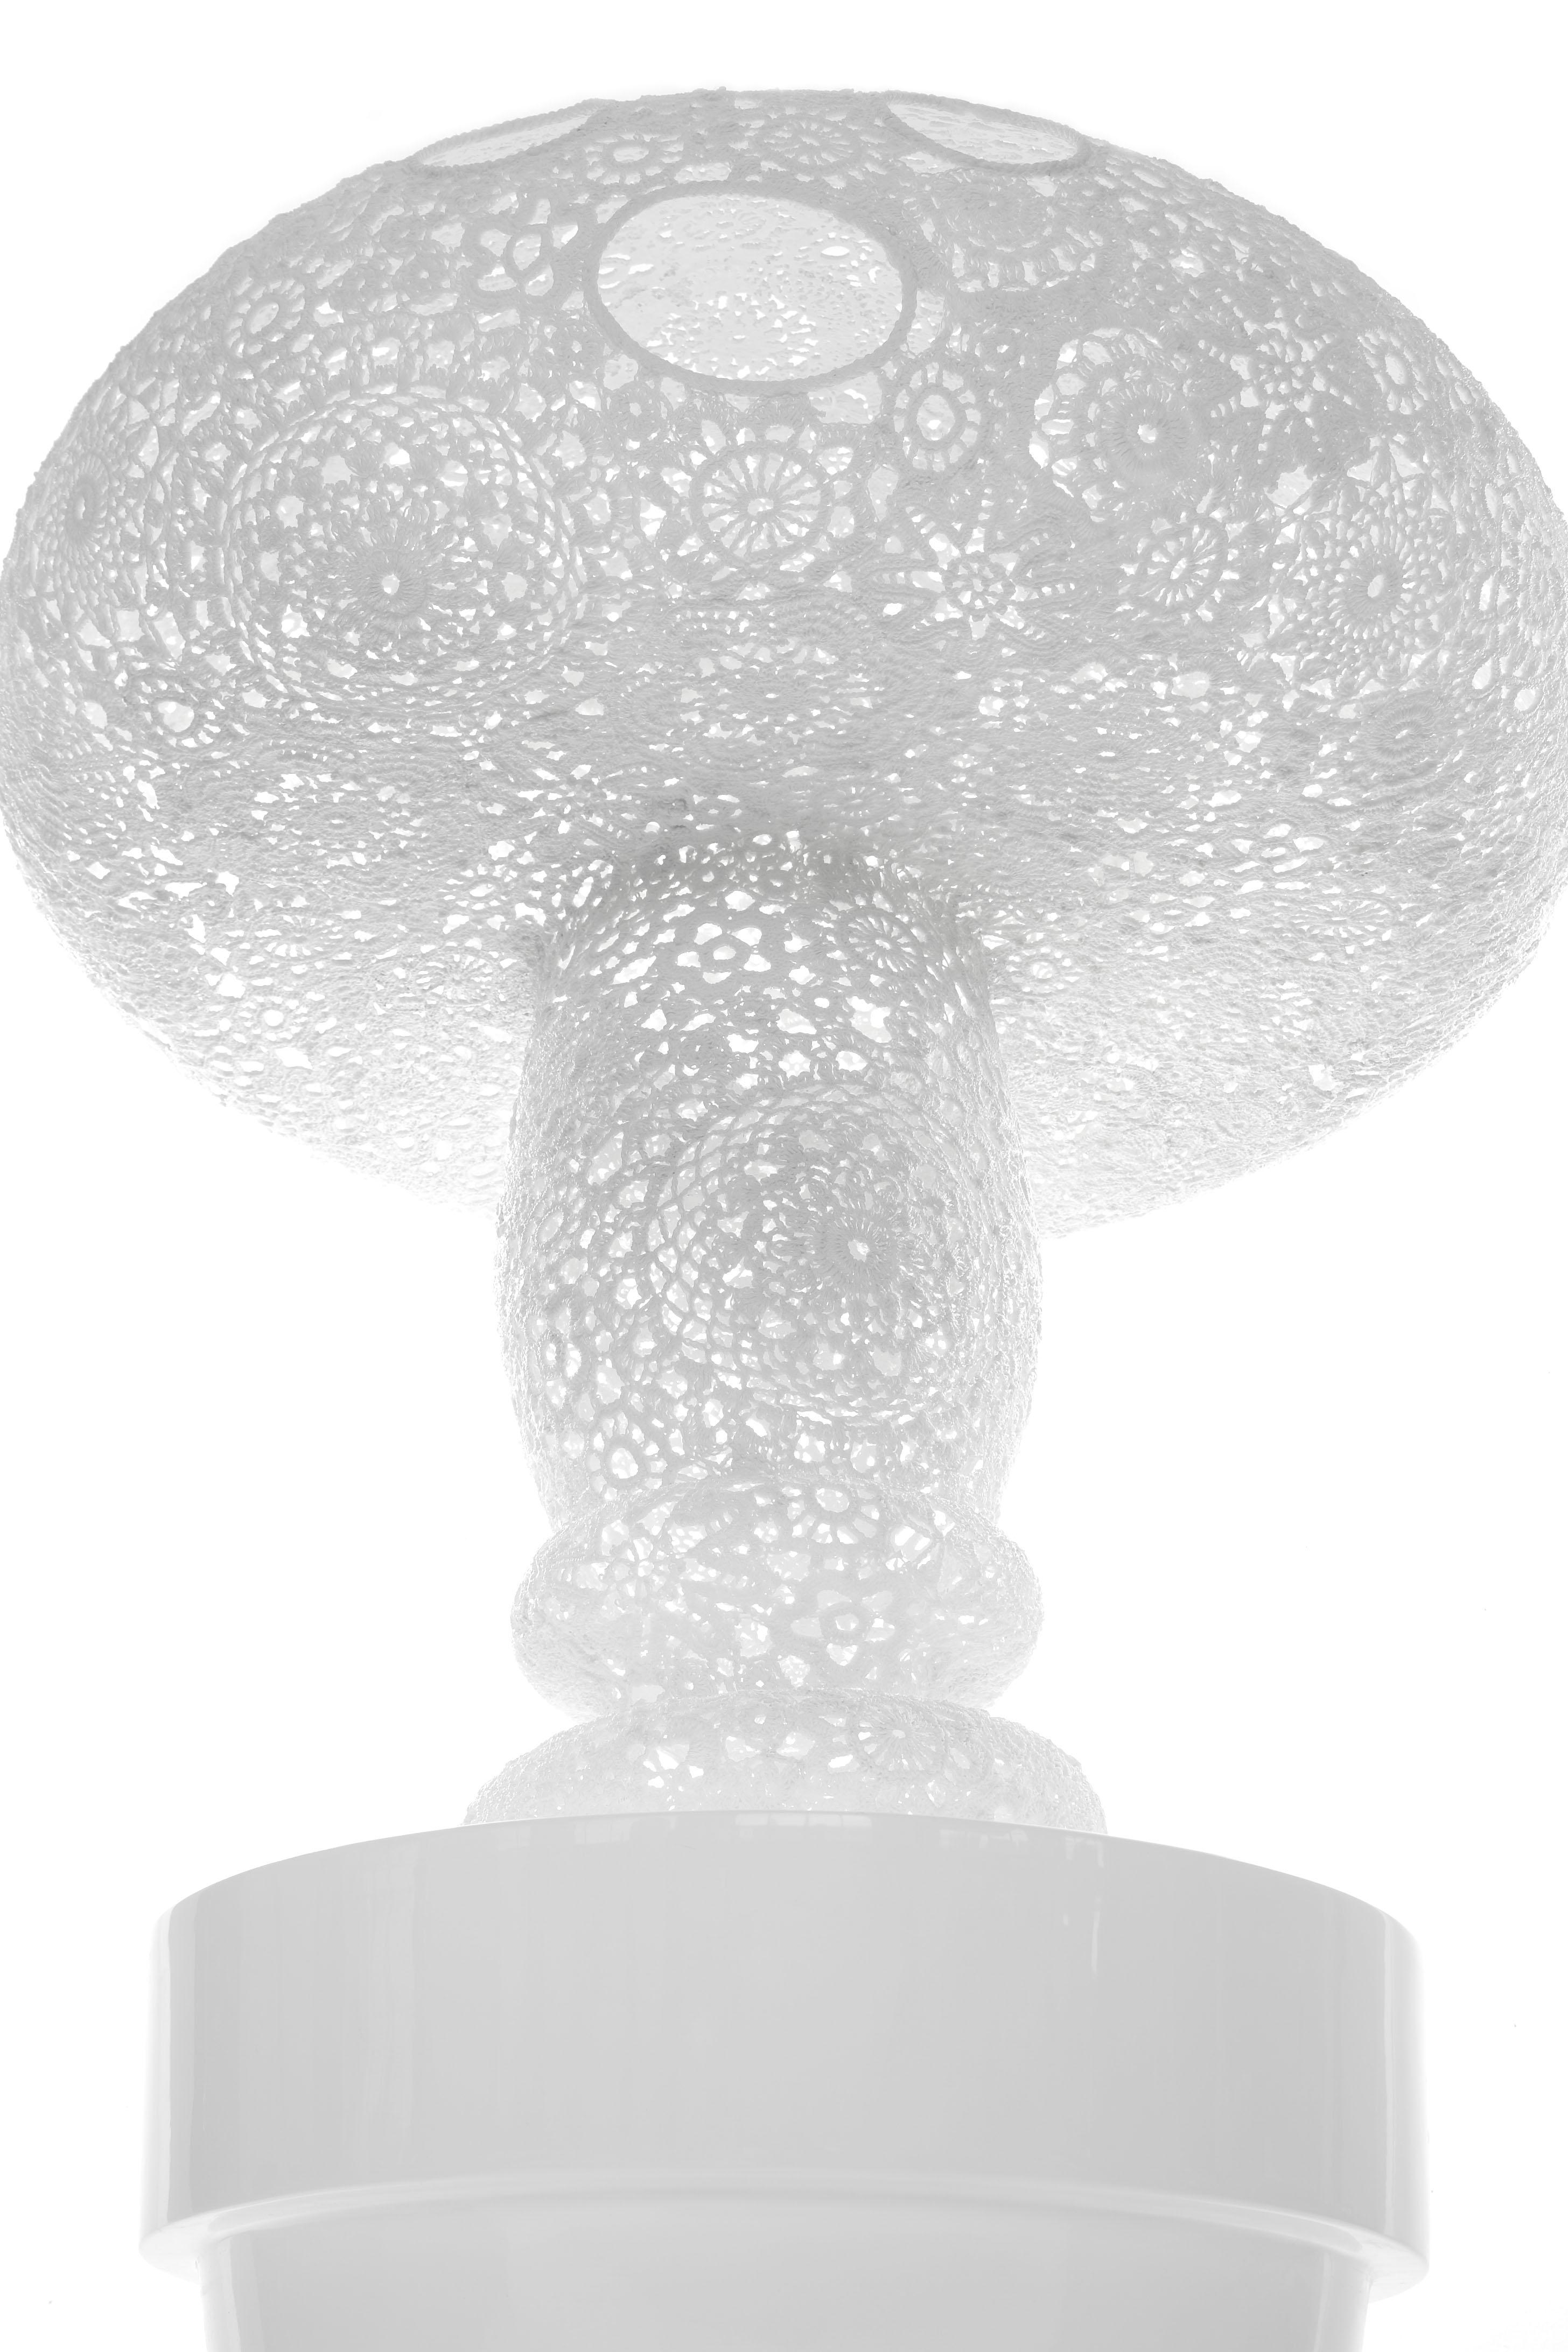 Indonesian Topiary Bob, by Marcel Wanders, Crocheted Sculpture, 2007, Edition #5/5 For Sale